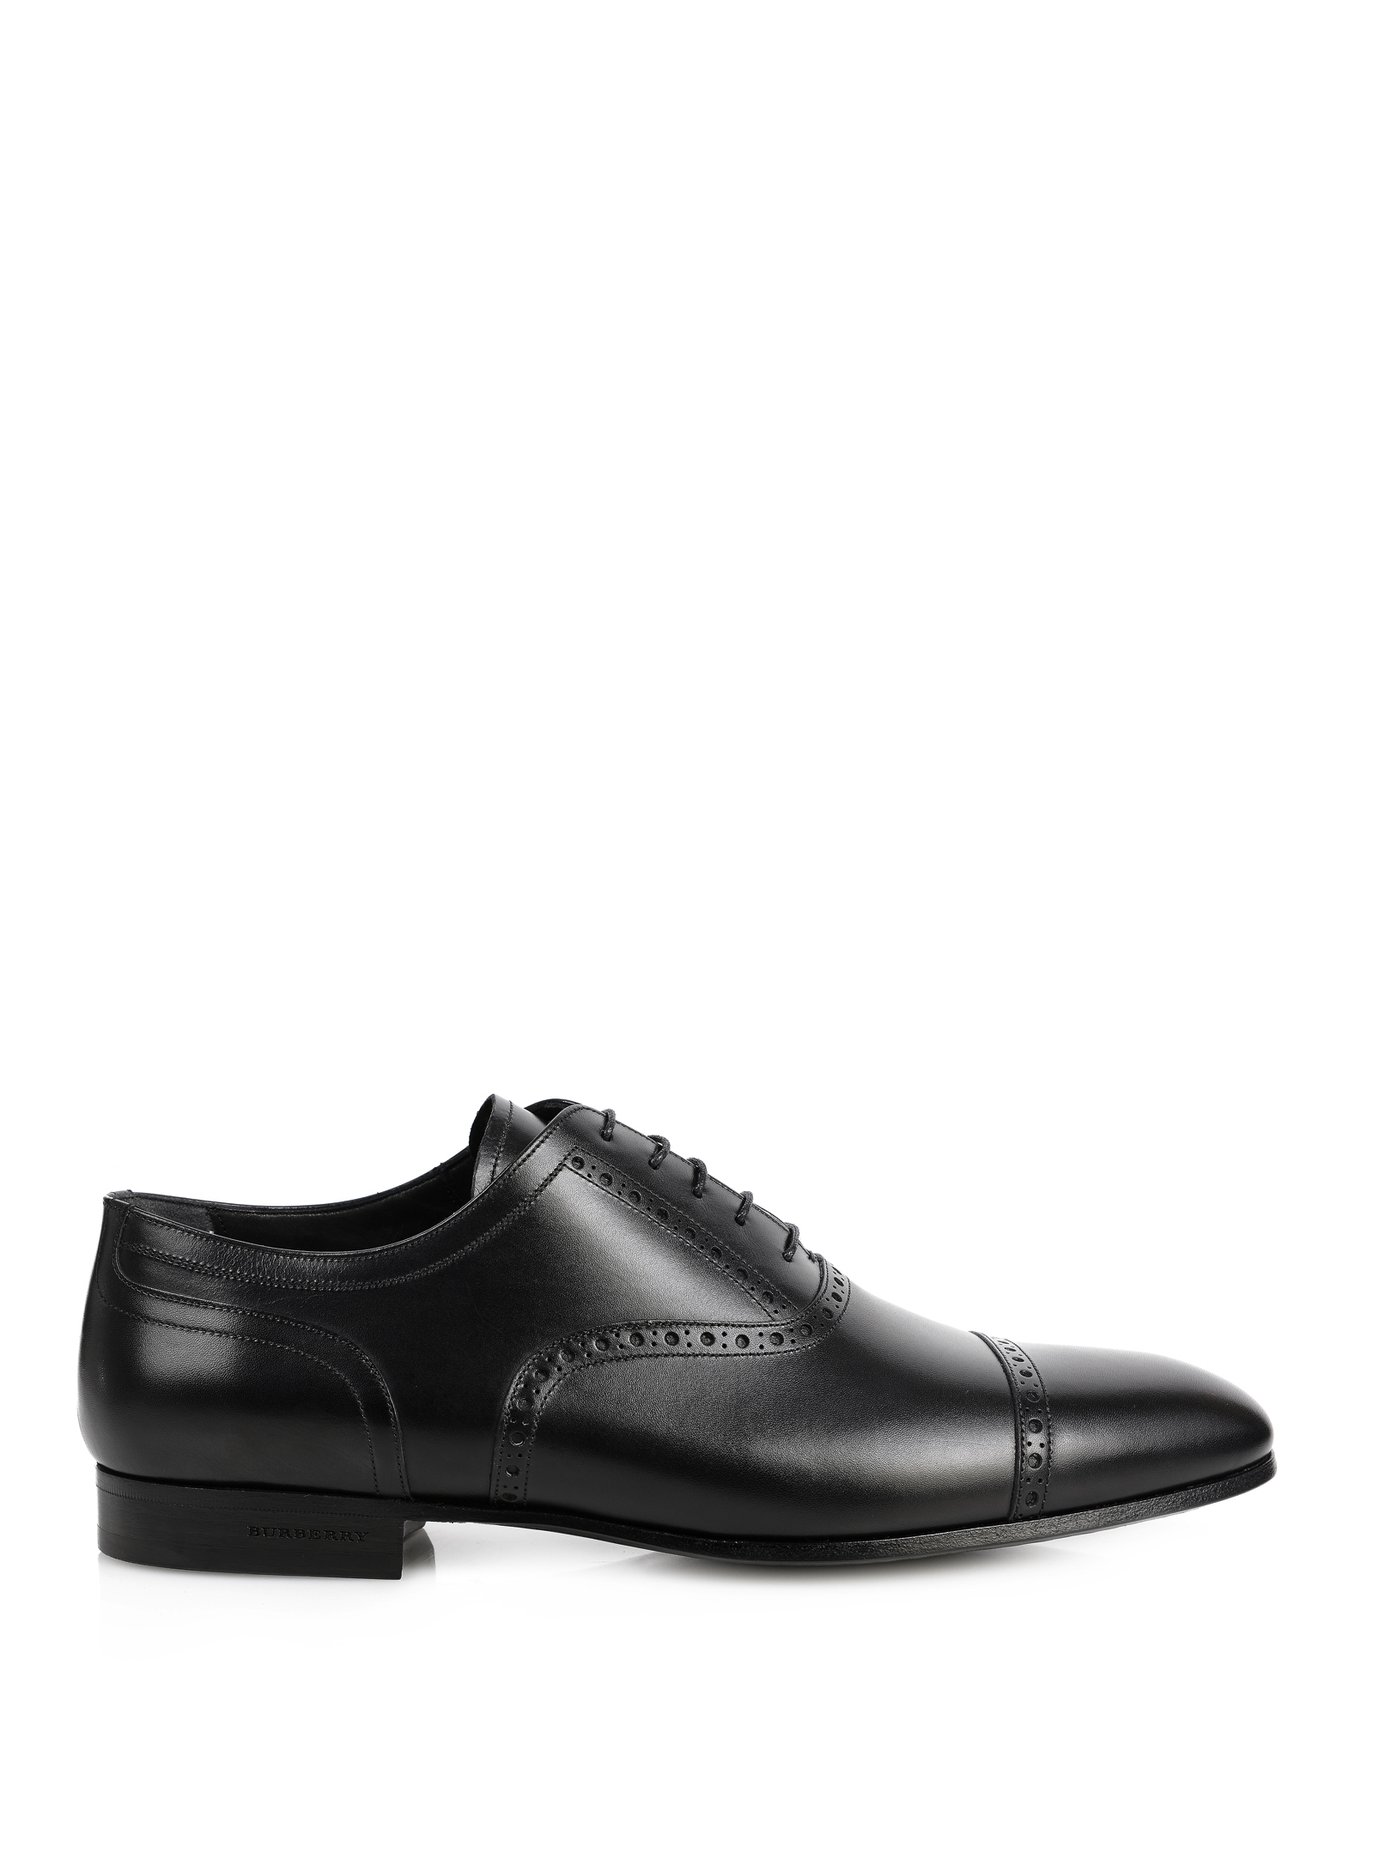 leather derby shoes | Burberry Shoes 